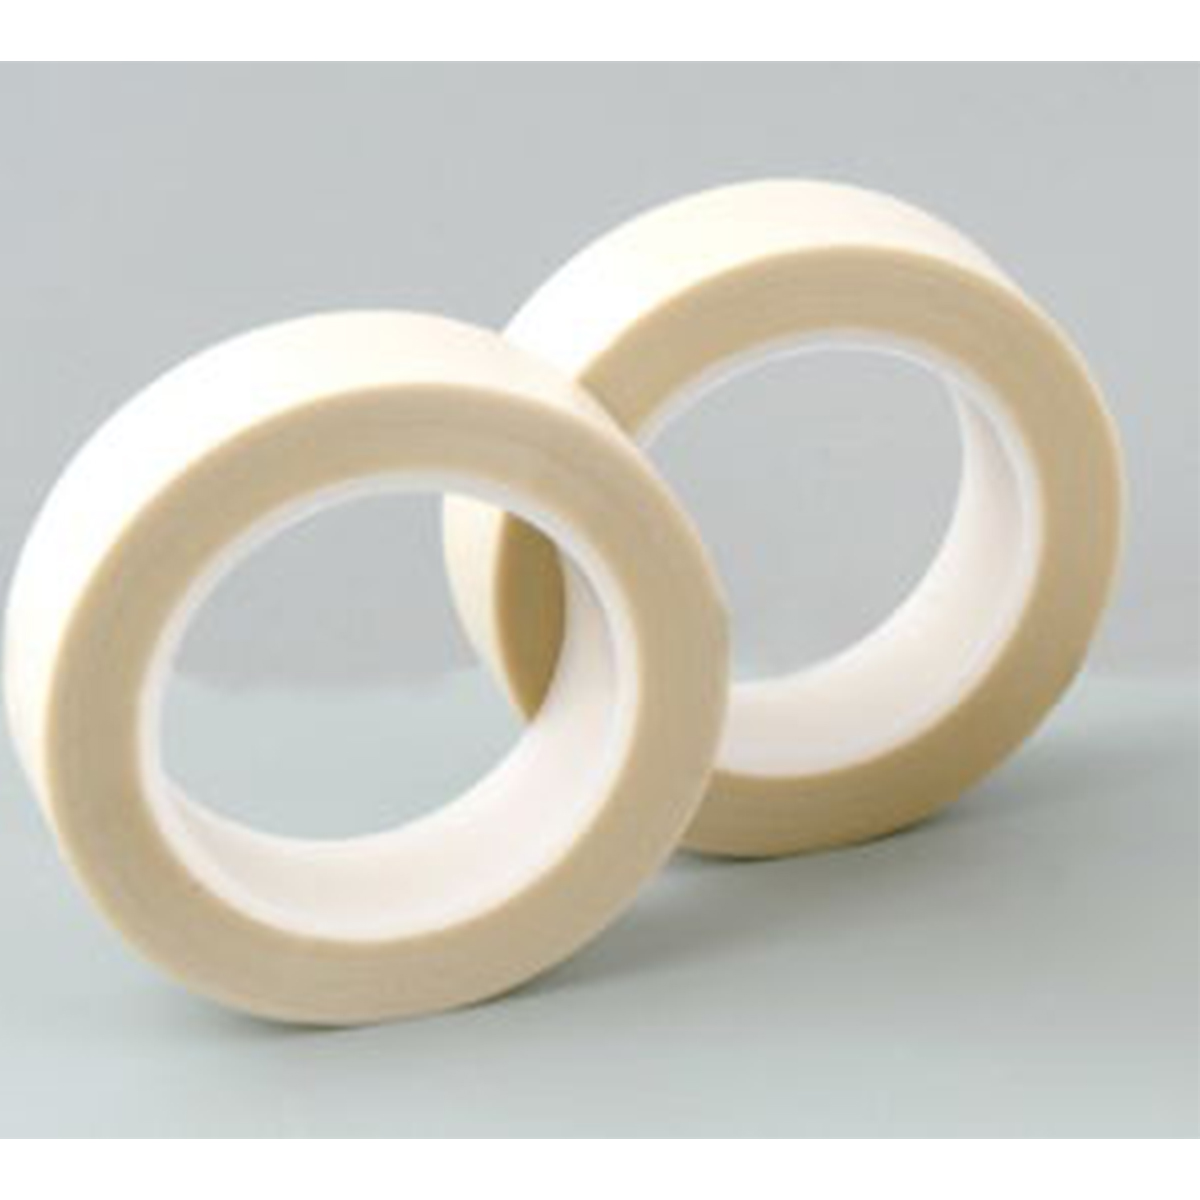 Single Coated Tapes